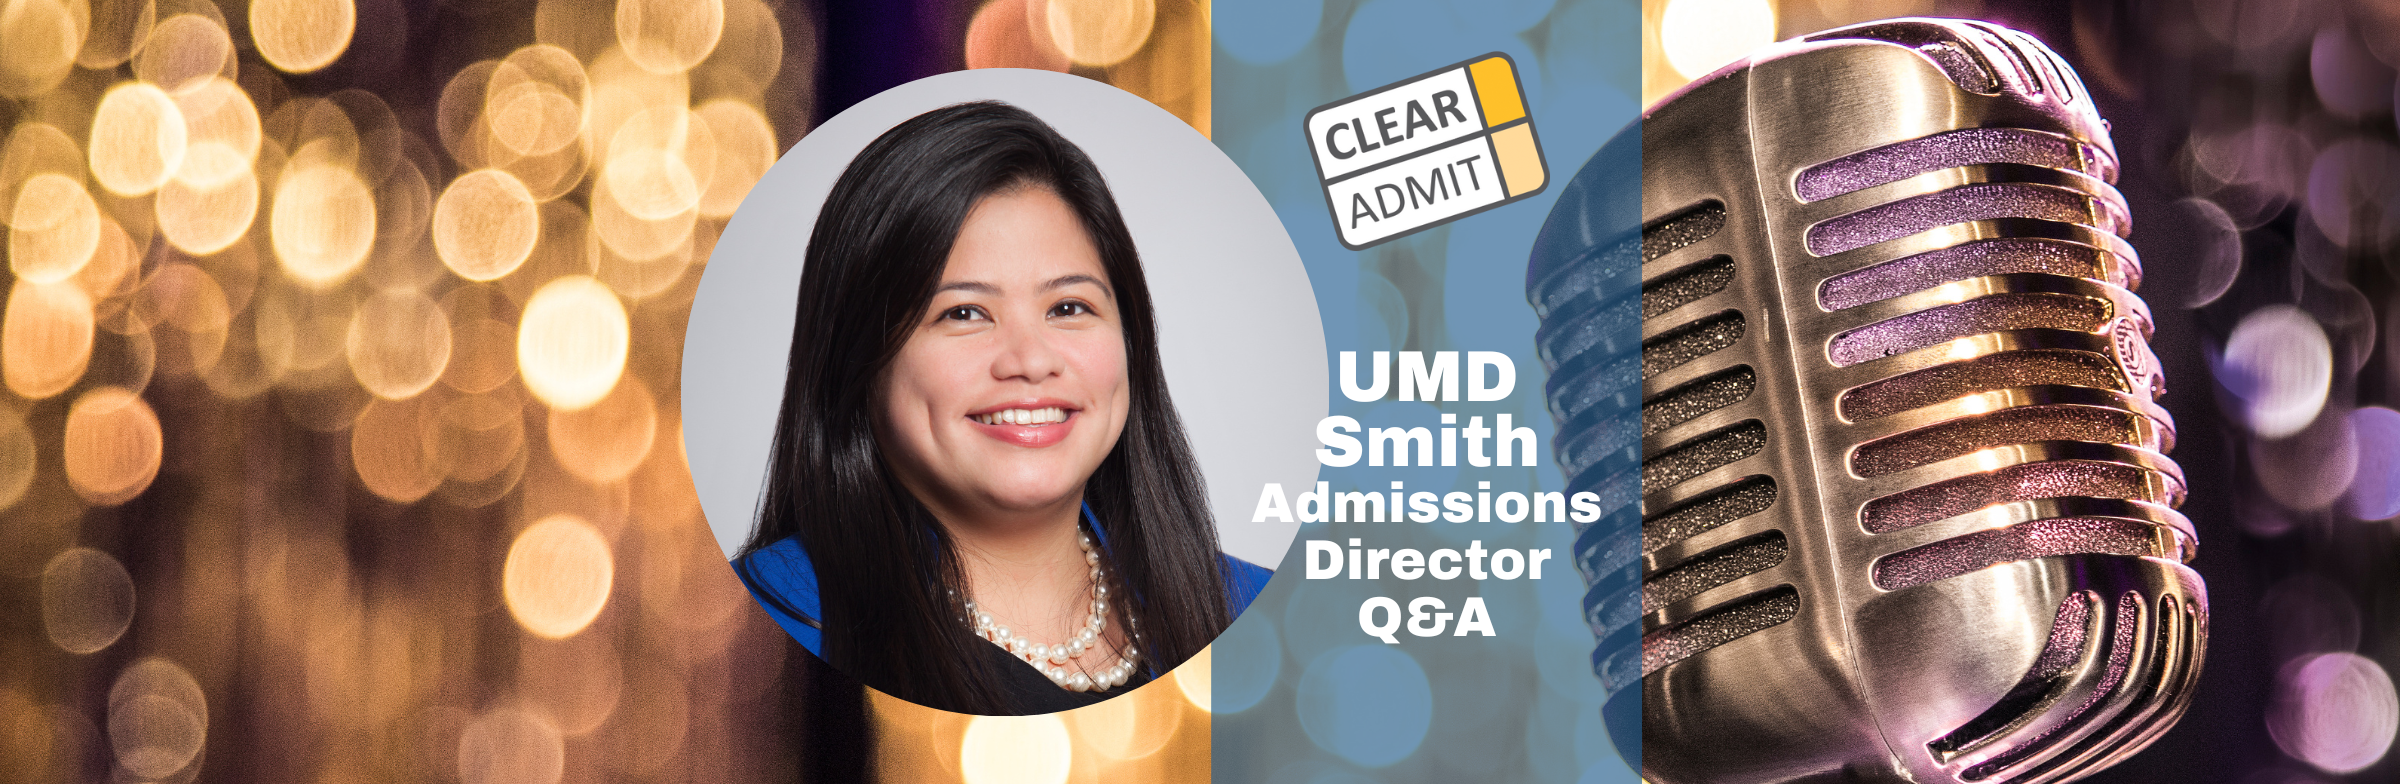 Image for Admissions Director Q&A: Maria Pineda of University of Maryland Smith School of Business